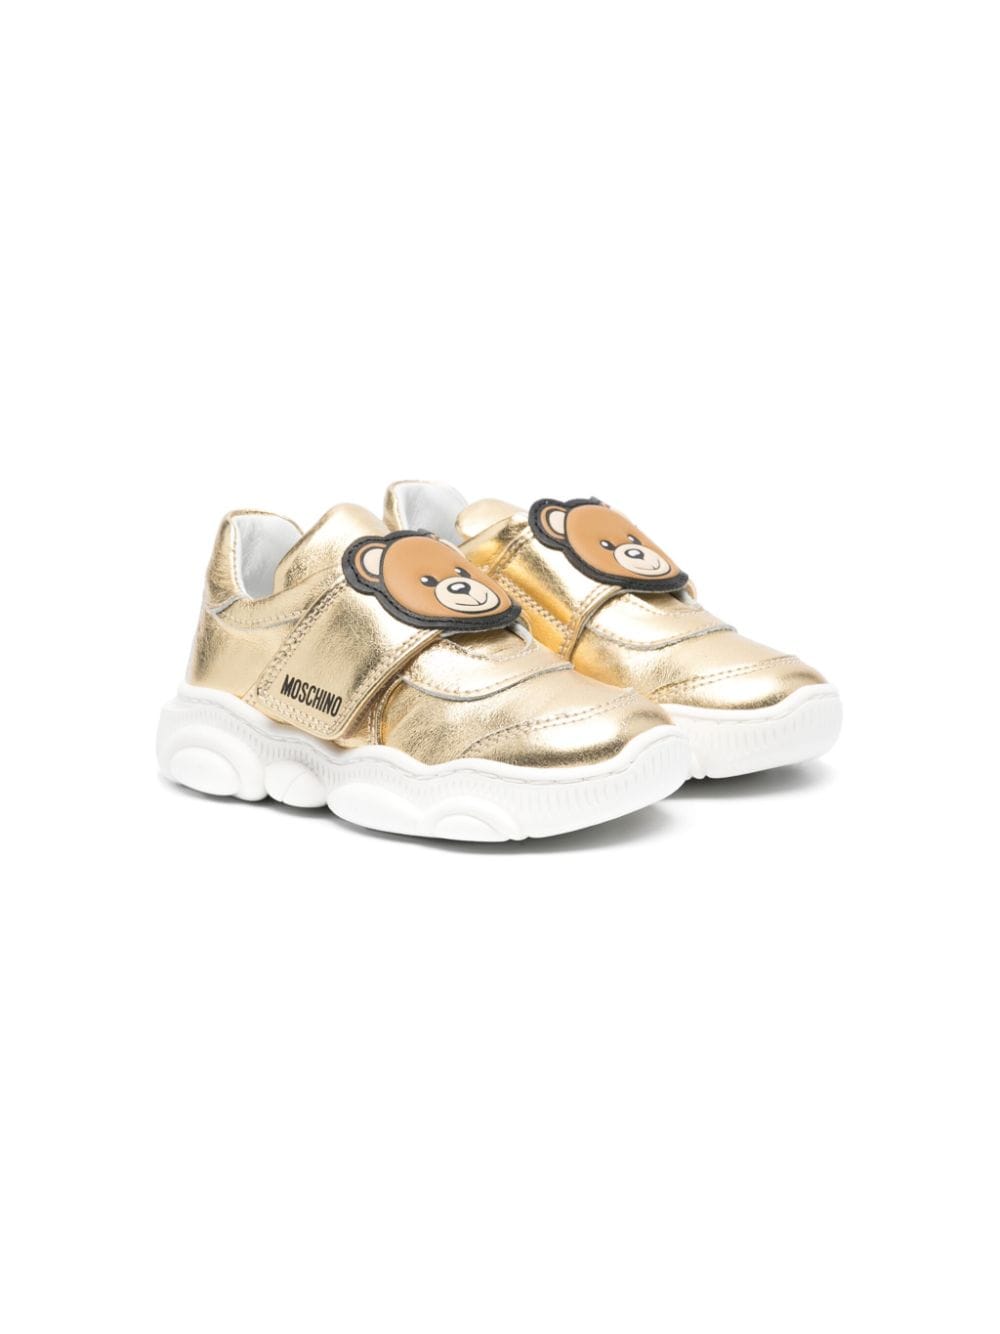 Moschino Kids' Teddy Bear Leather Sneakers In Gold